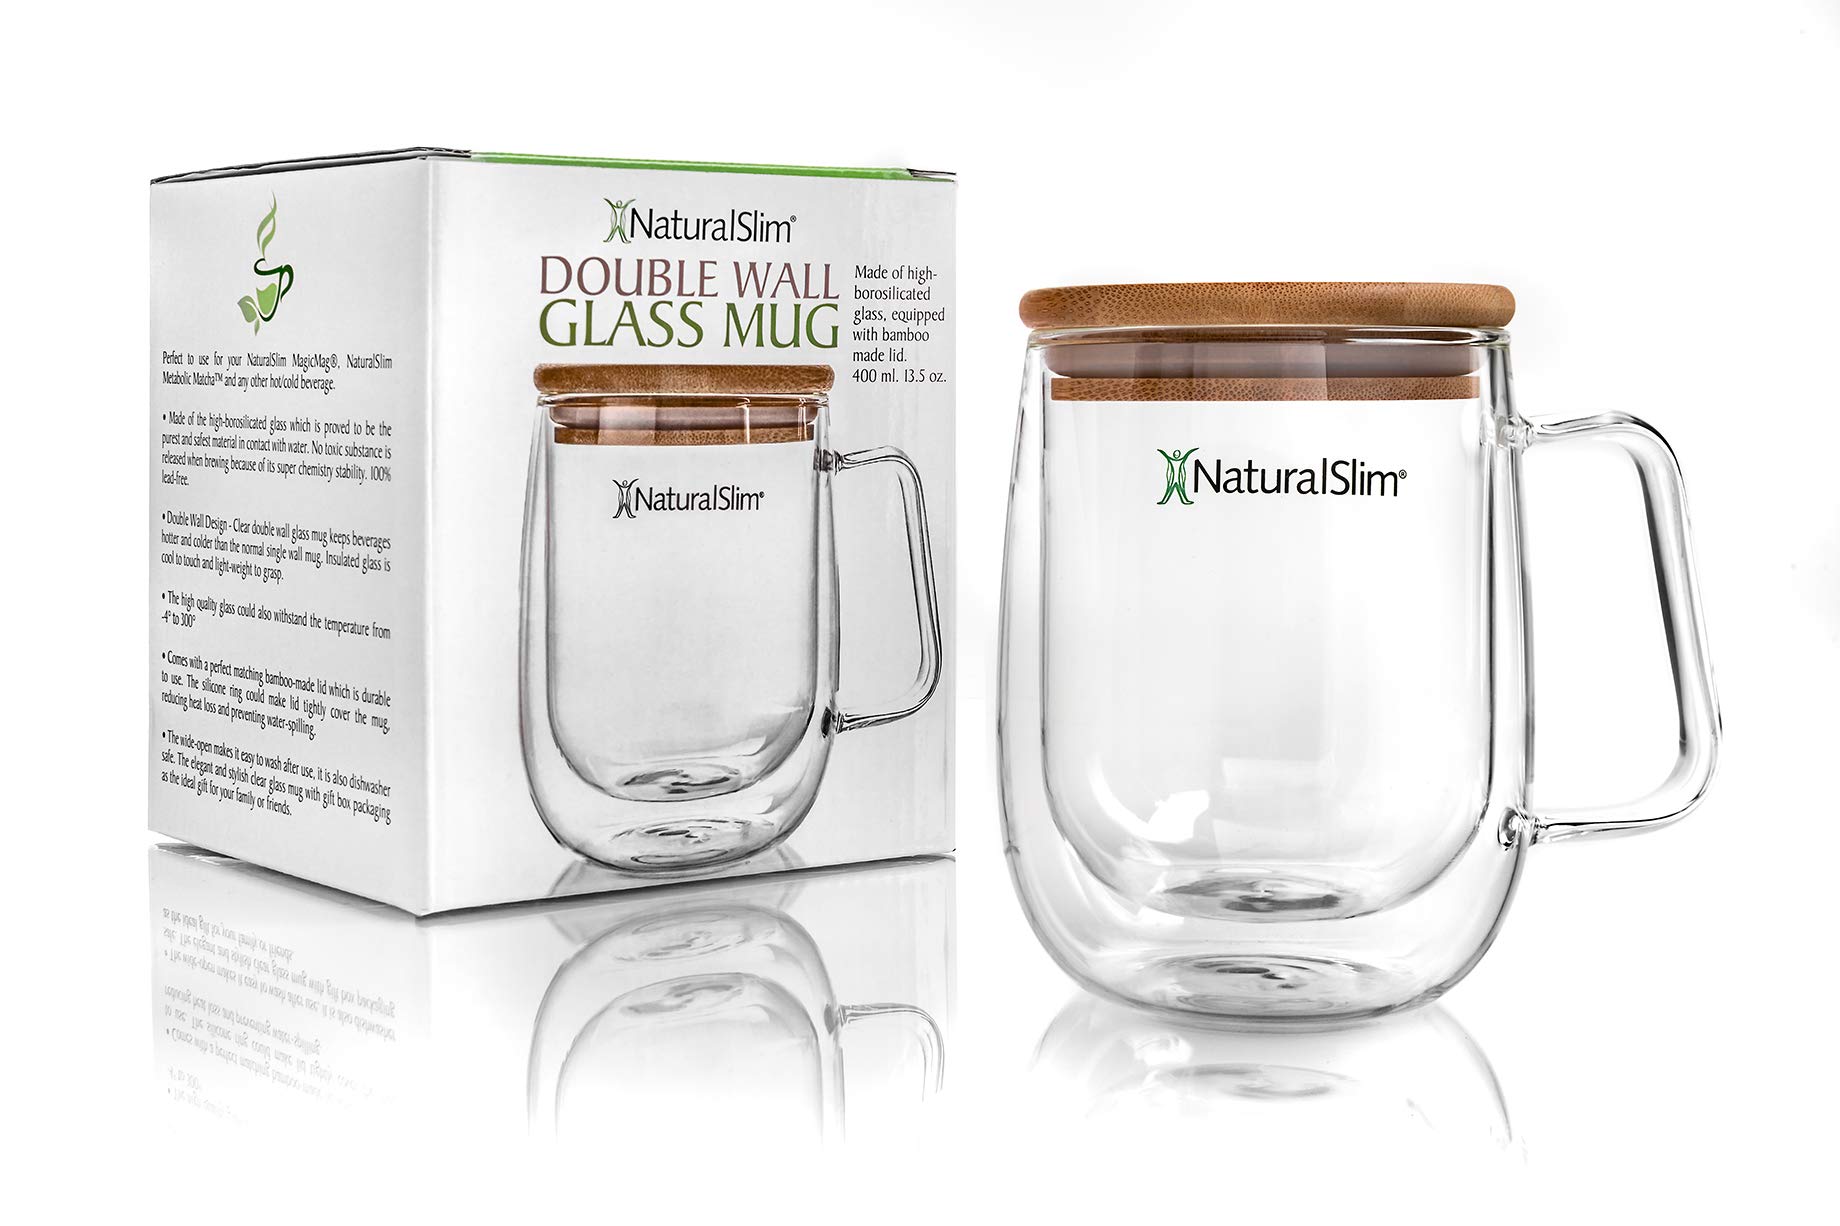 NaturalSlim Double Wall Glass Mug & Metabolic Matcha Green Tea Powder - Borosilicate Clear Drinking Cup Insulated w/Bamboo Lid 13.5 oz. - Japanese Matcha for Metabolism Weight Loss Tea ​30g